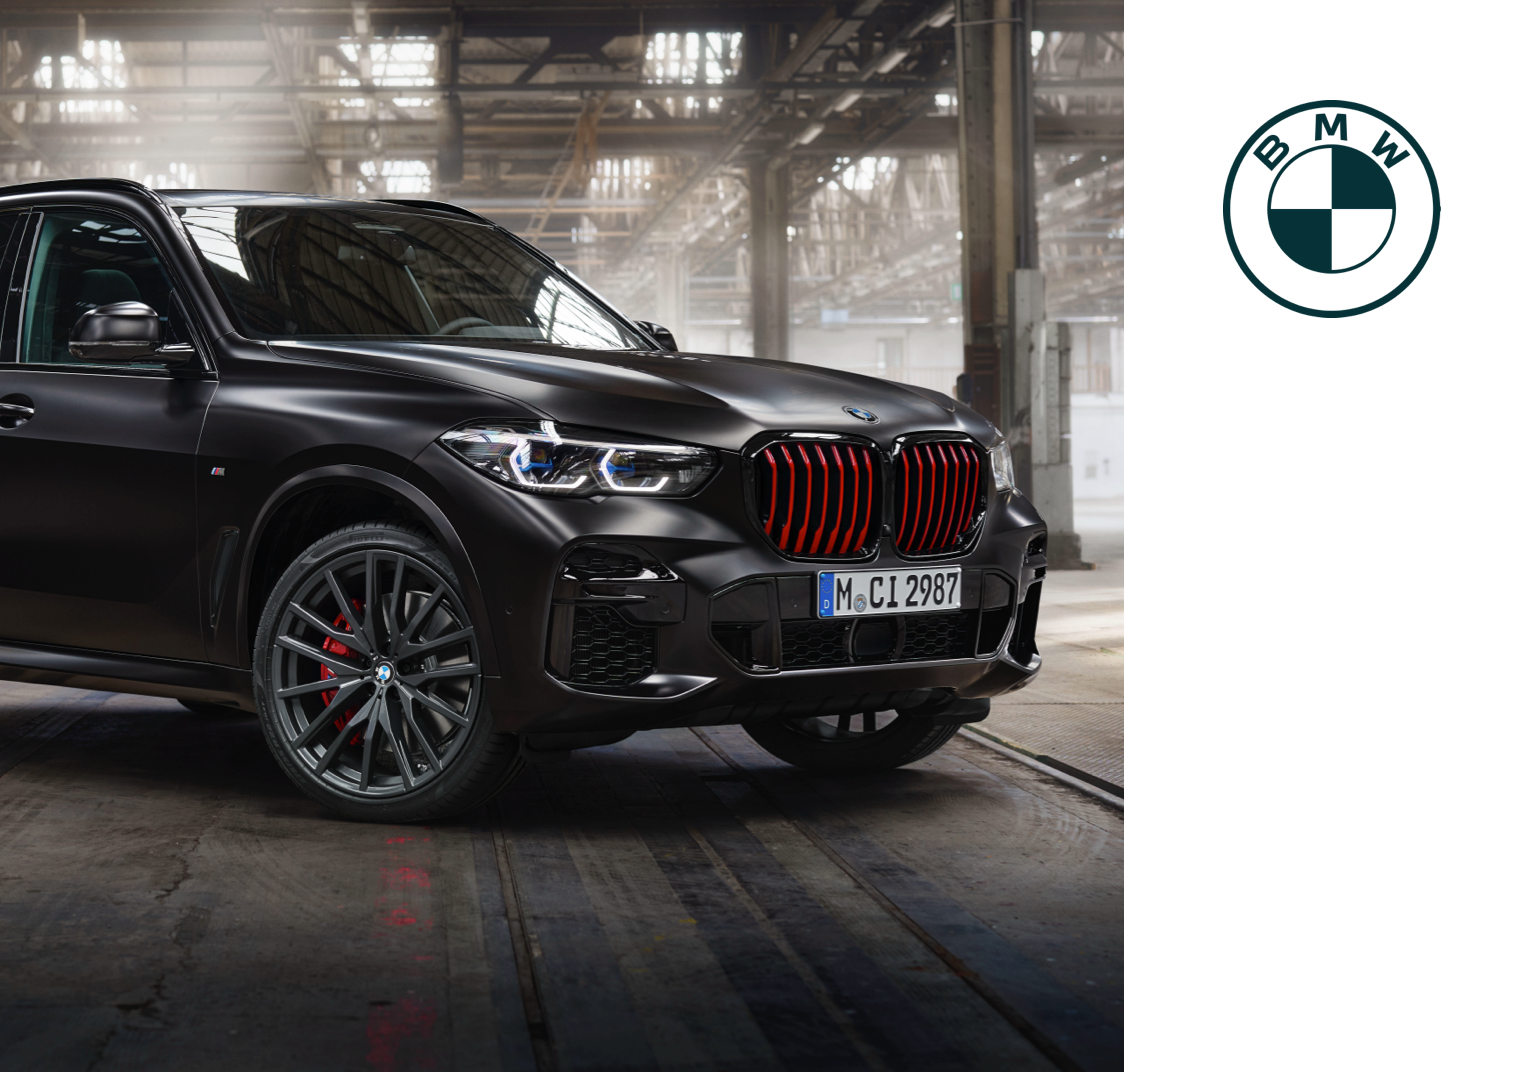 BMW Group is the world’s leading manufacturer of premium automobiles and motorcycles.